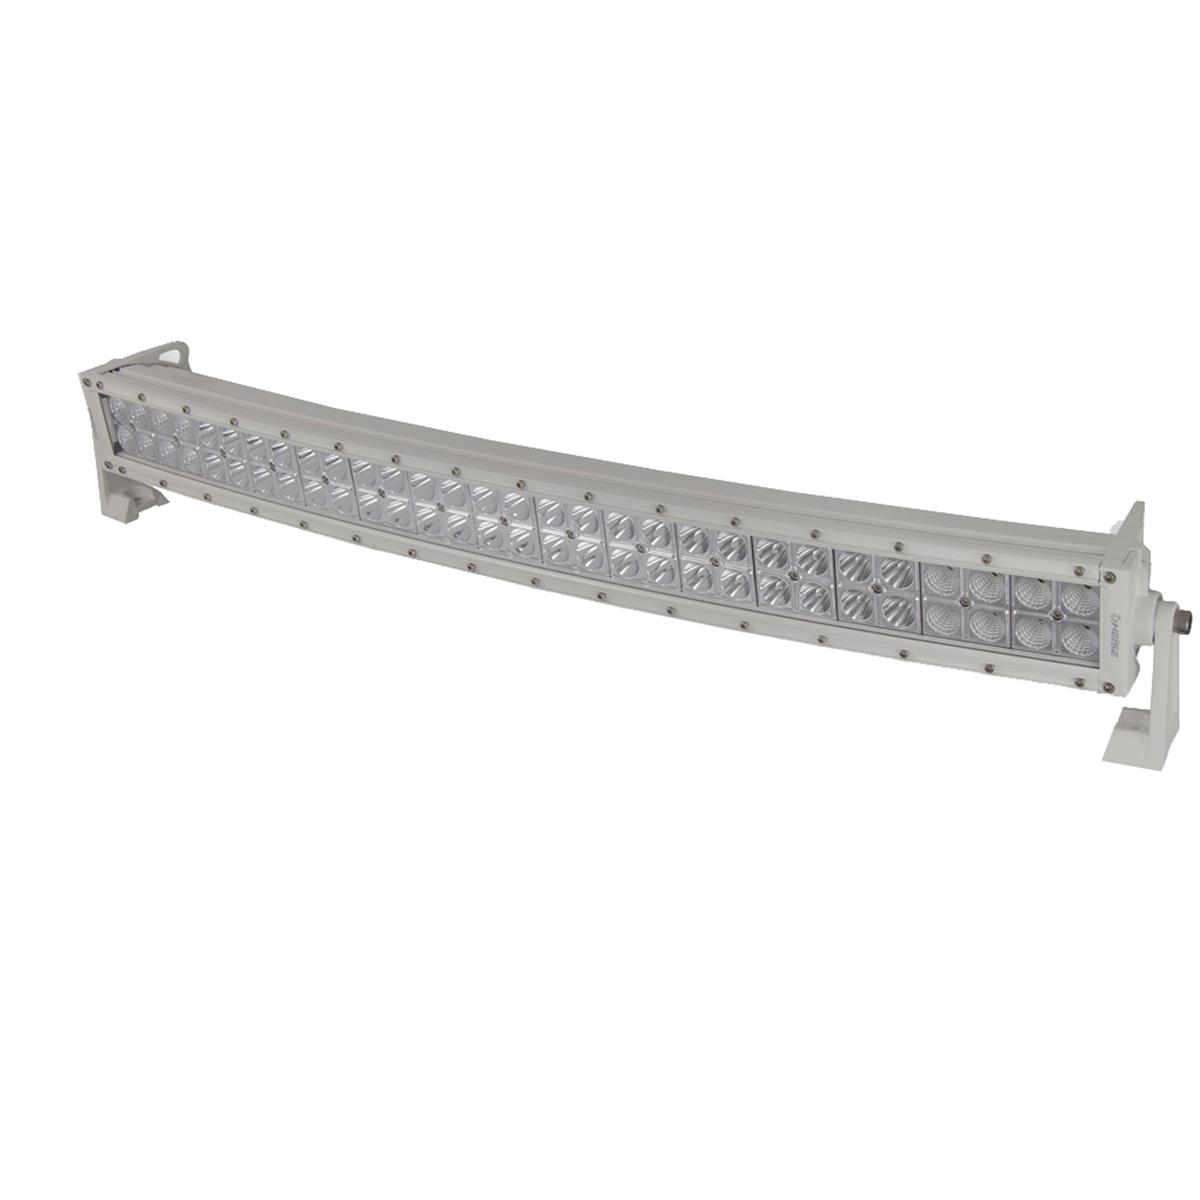 HEISE LED Lighting Systems HE-MDRC30